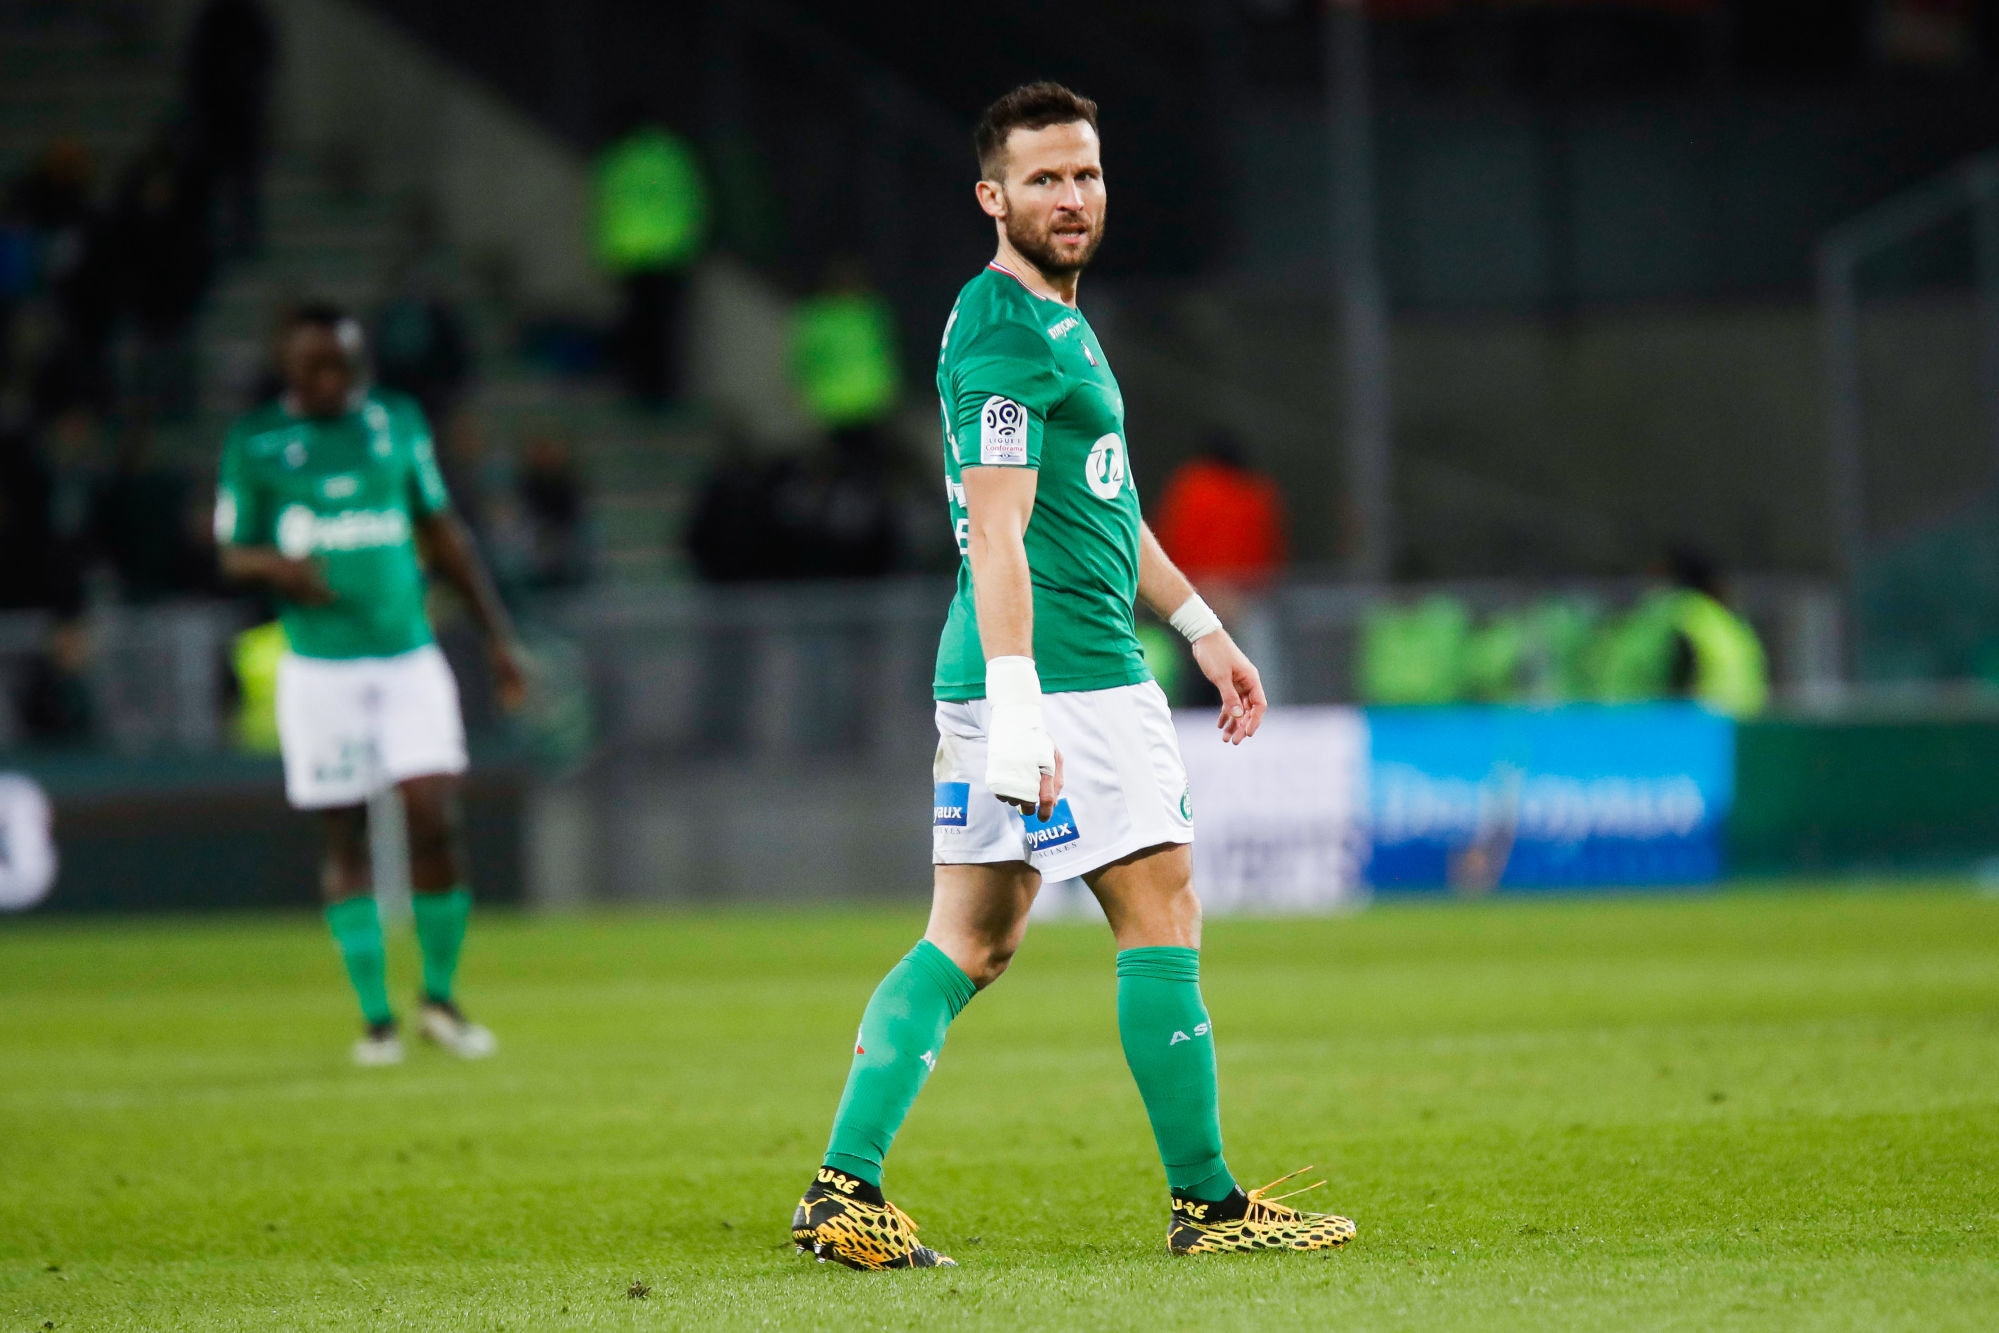 The excellent memories of Yohan Cabaye with LOSC - Crumpe